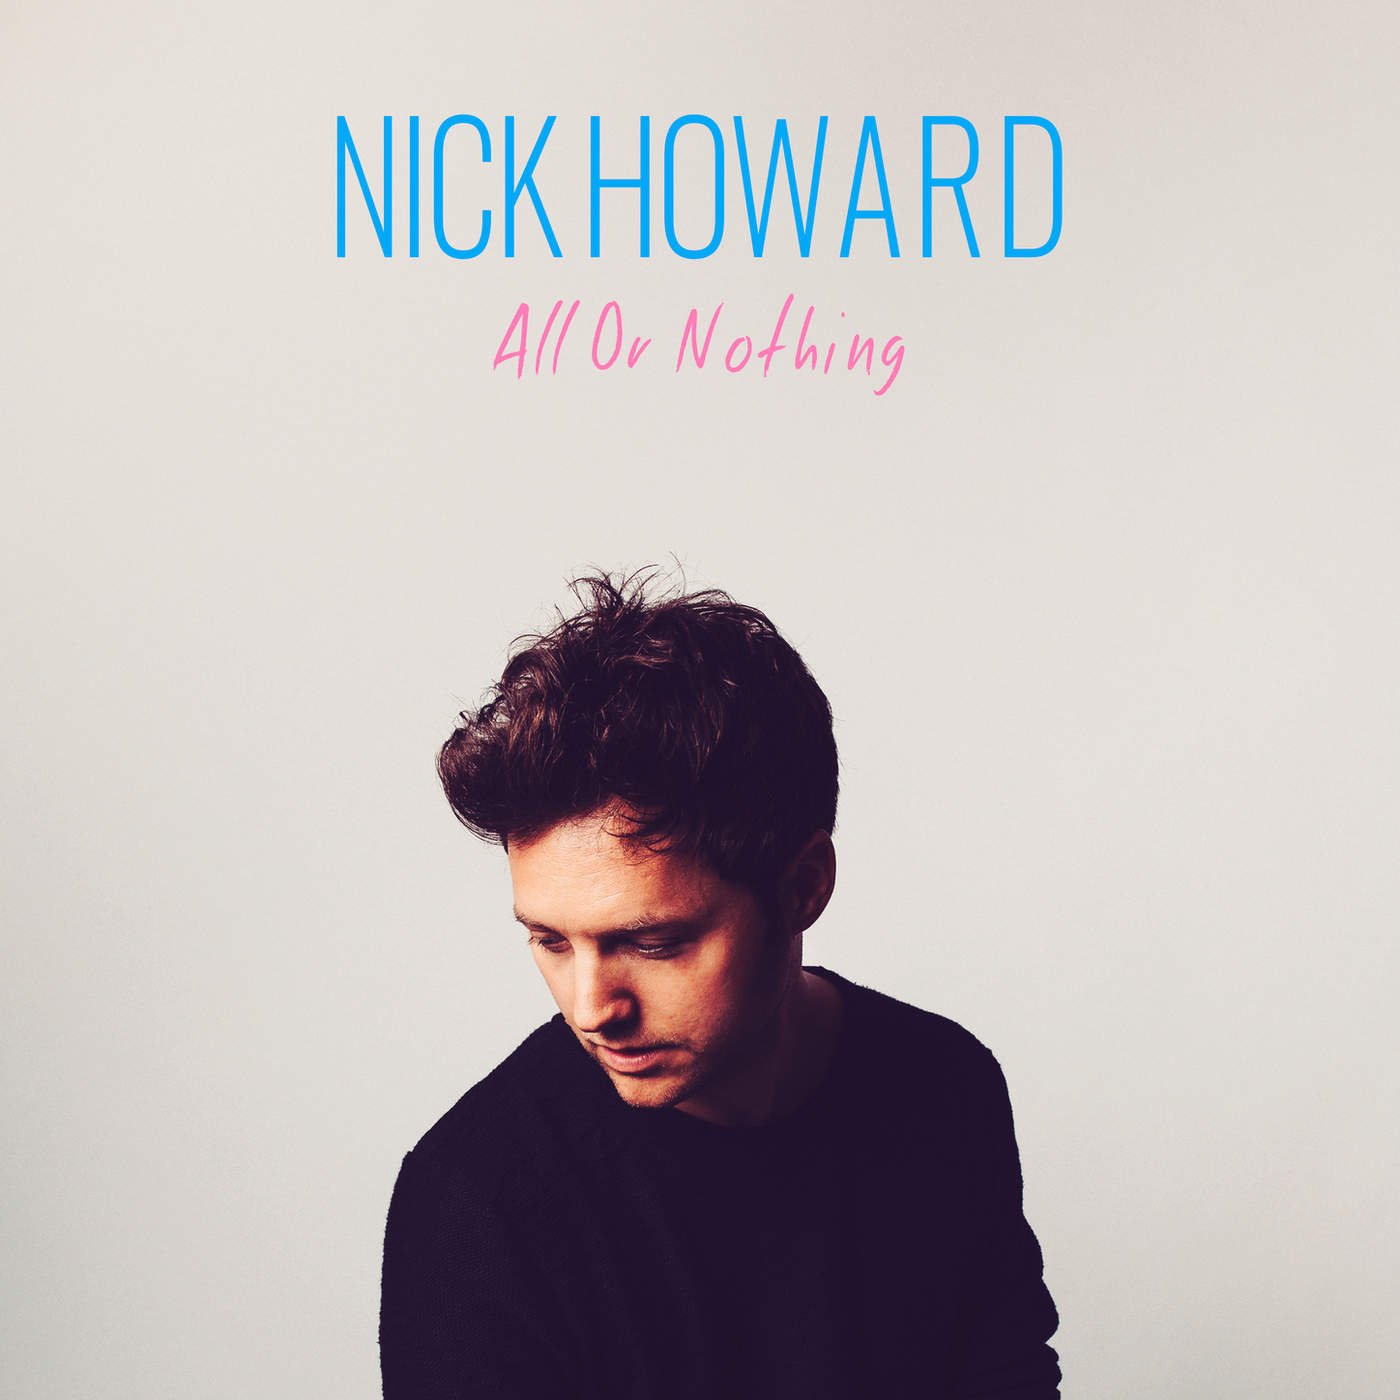 Nick world. Nick Howard. Nick Hovard. All or nothing.